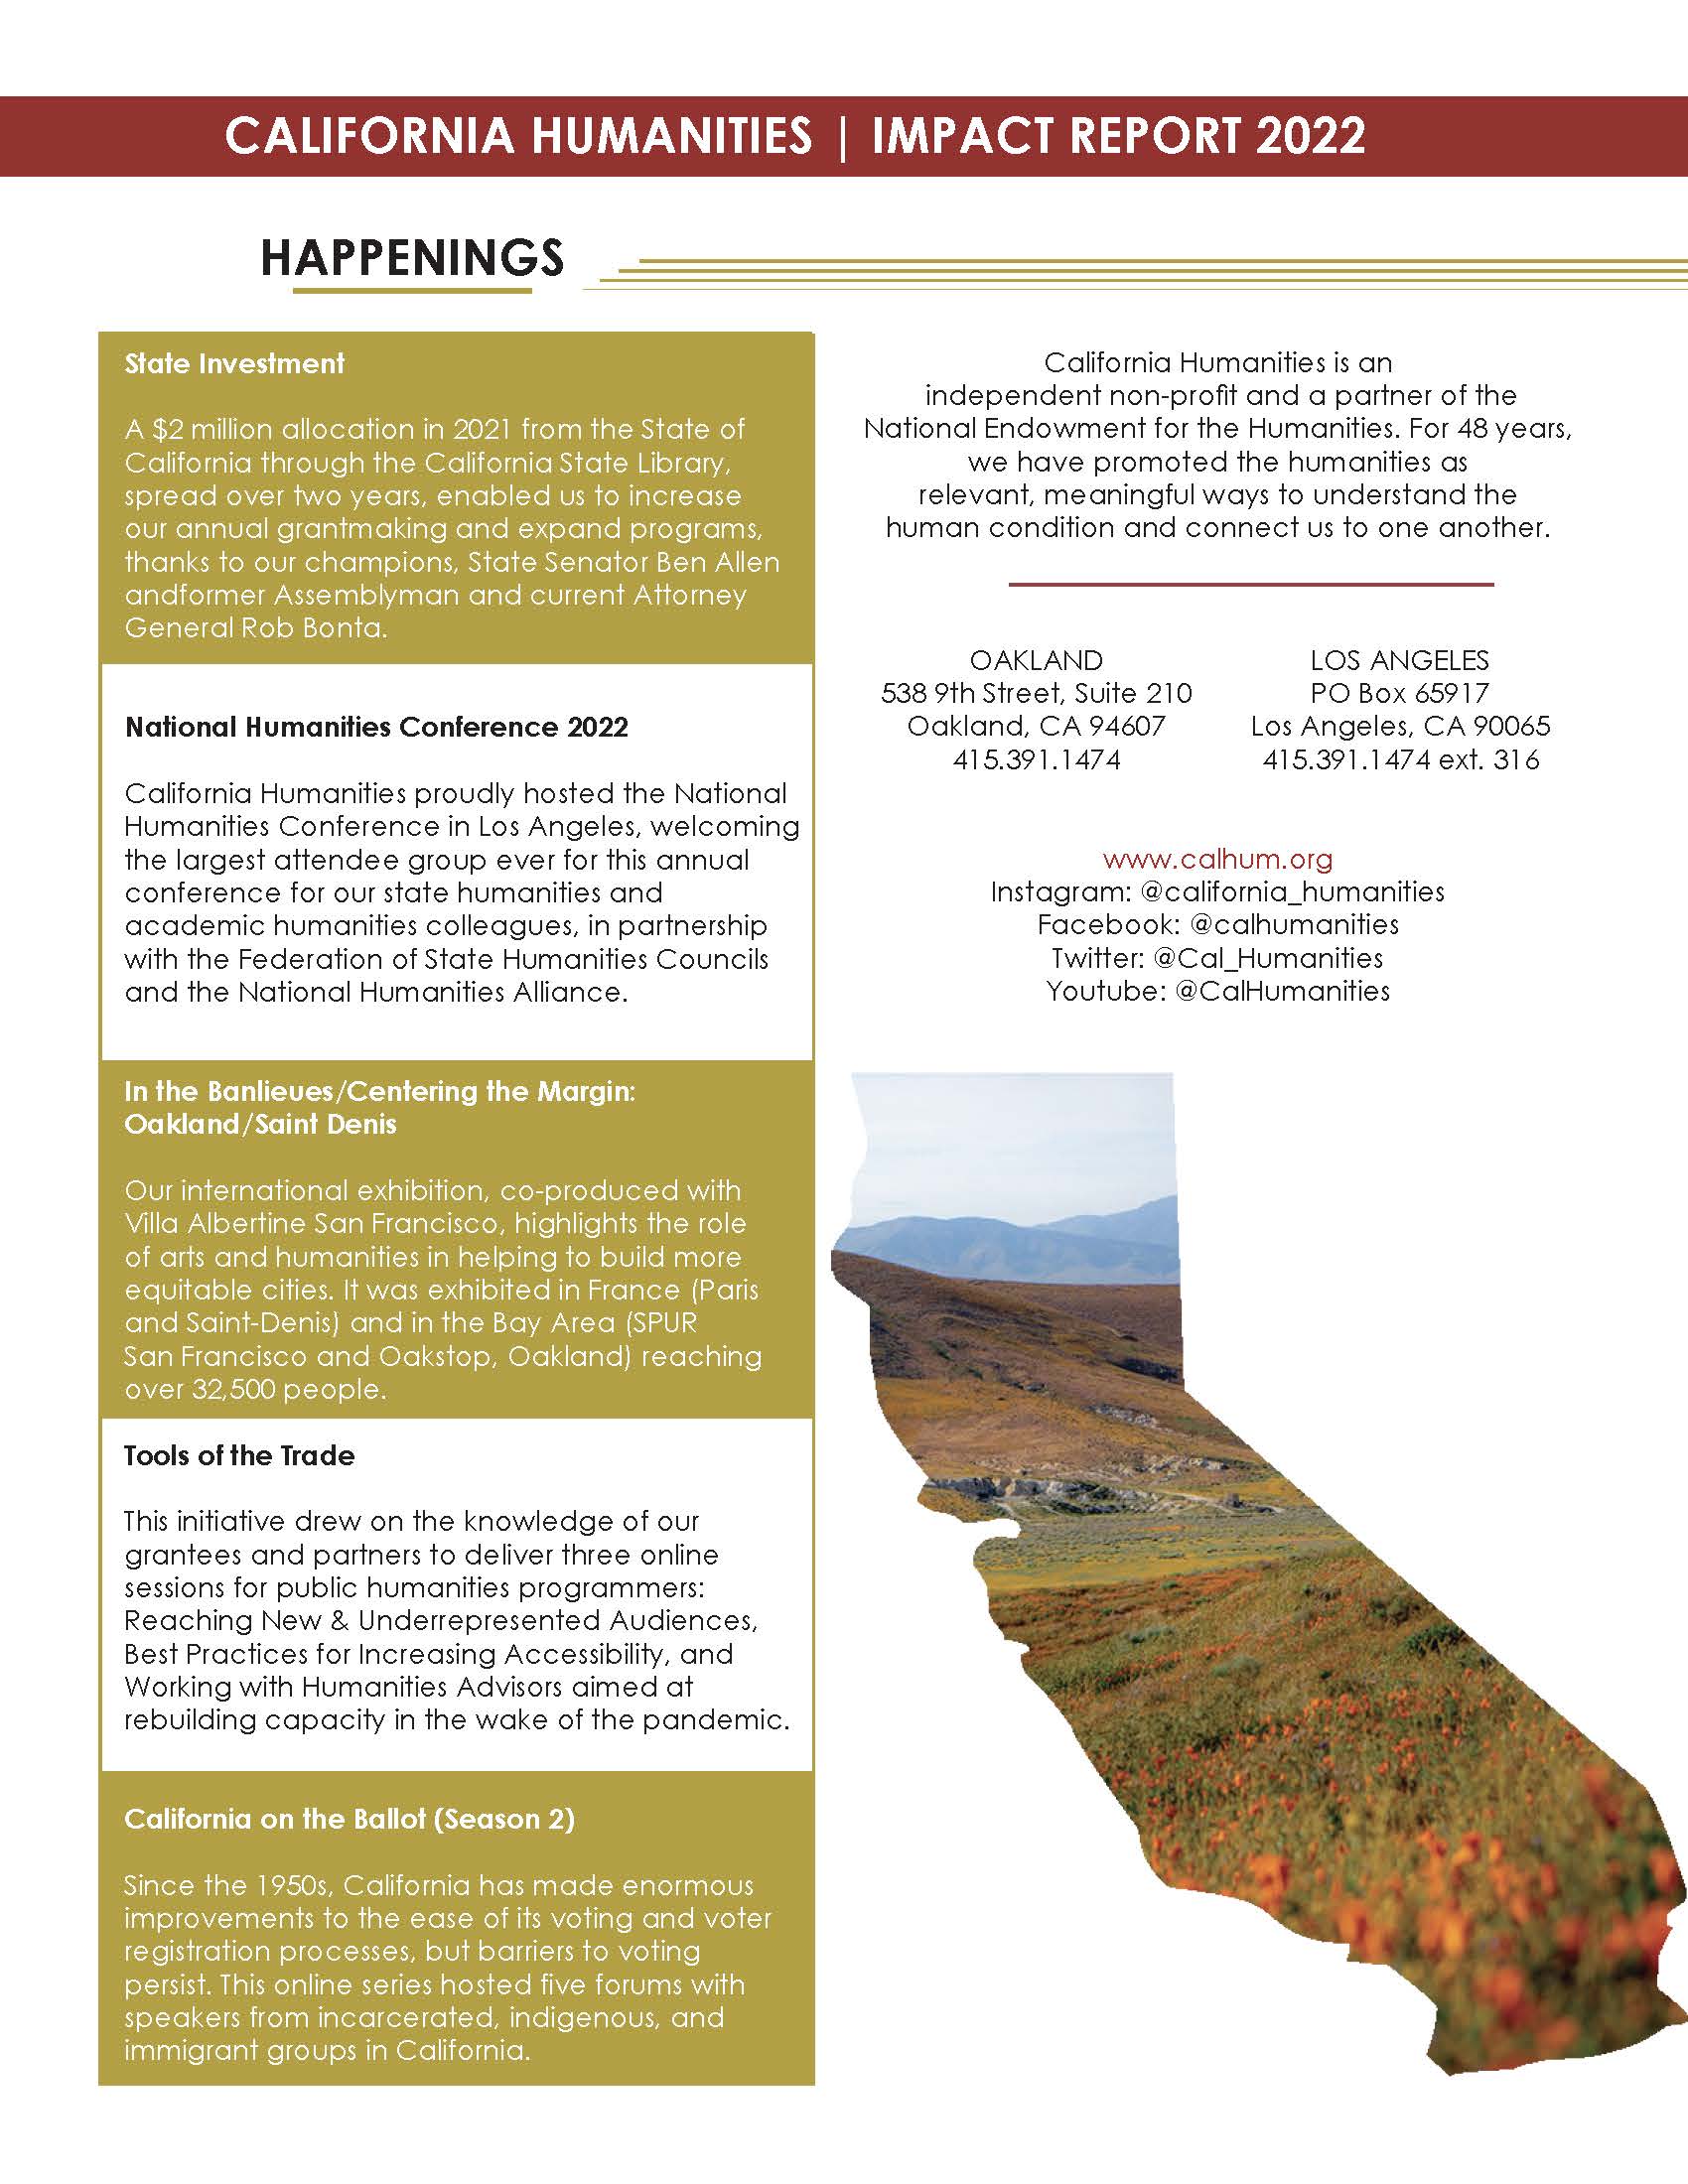 Page of impact report. Red banner across the top with words California Humanities |  Impact Report 2022, and "Happenings" section as well as image of California state outline with a photo of field of poppies.